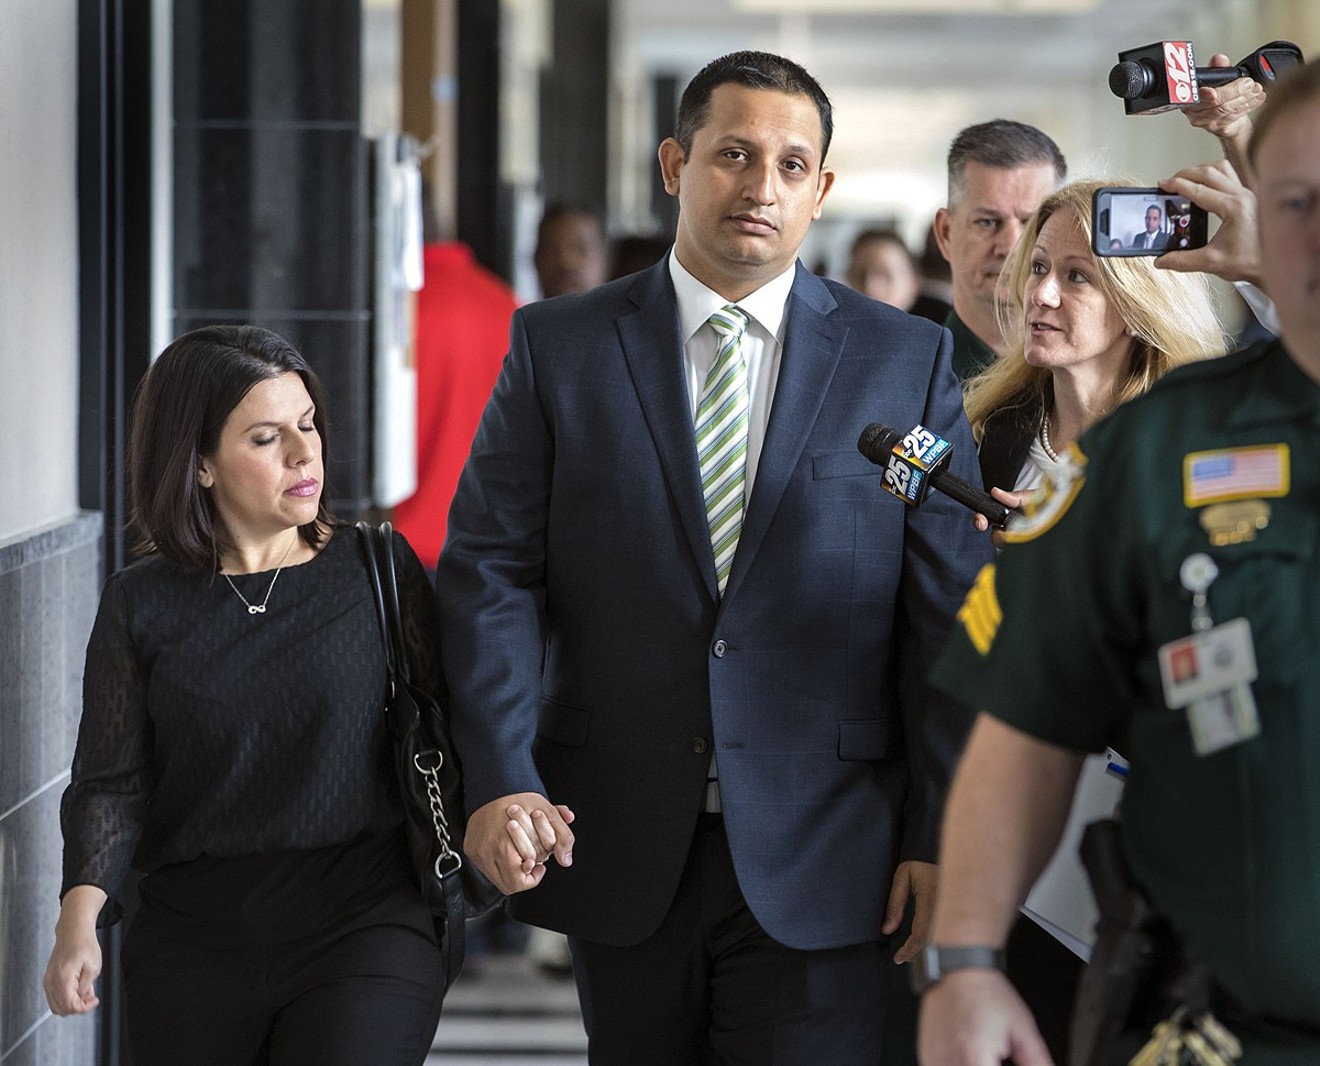 Nouman Raja leaves court after a hearing this past January 26.